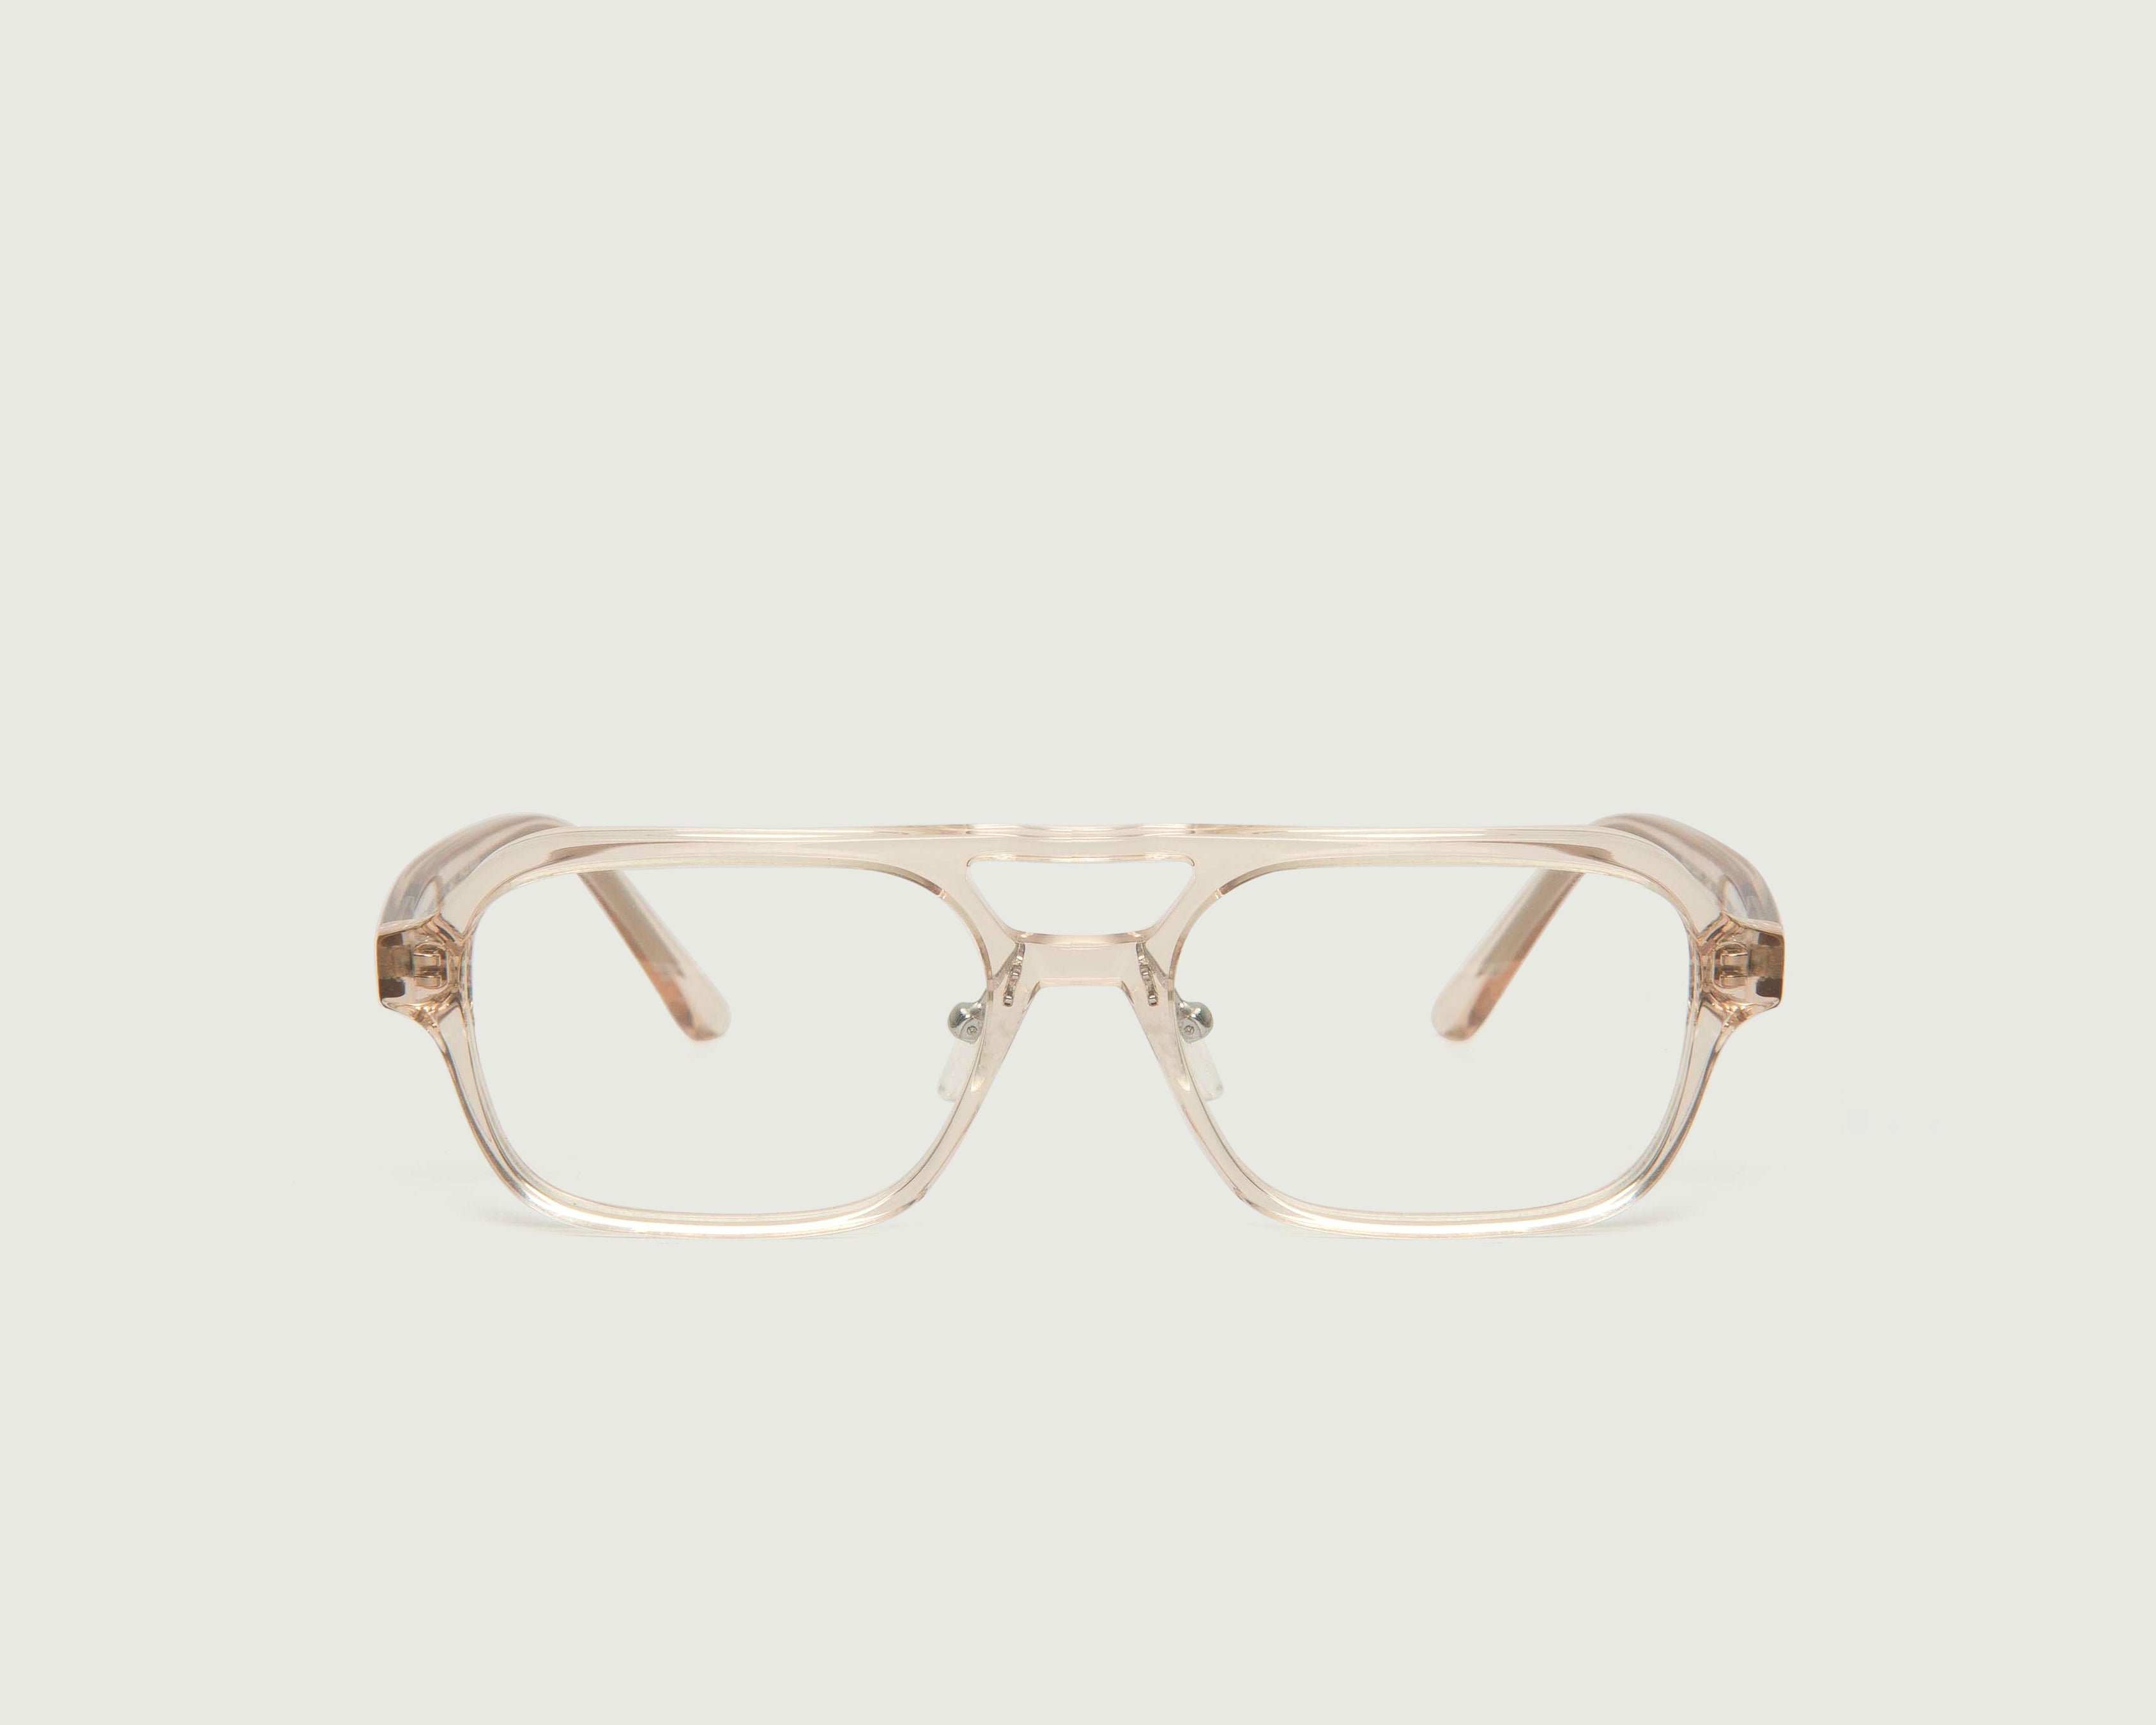 Pale Nude::Sly Eyeglasses pilot nude bioacetate front (6781235626038)